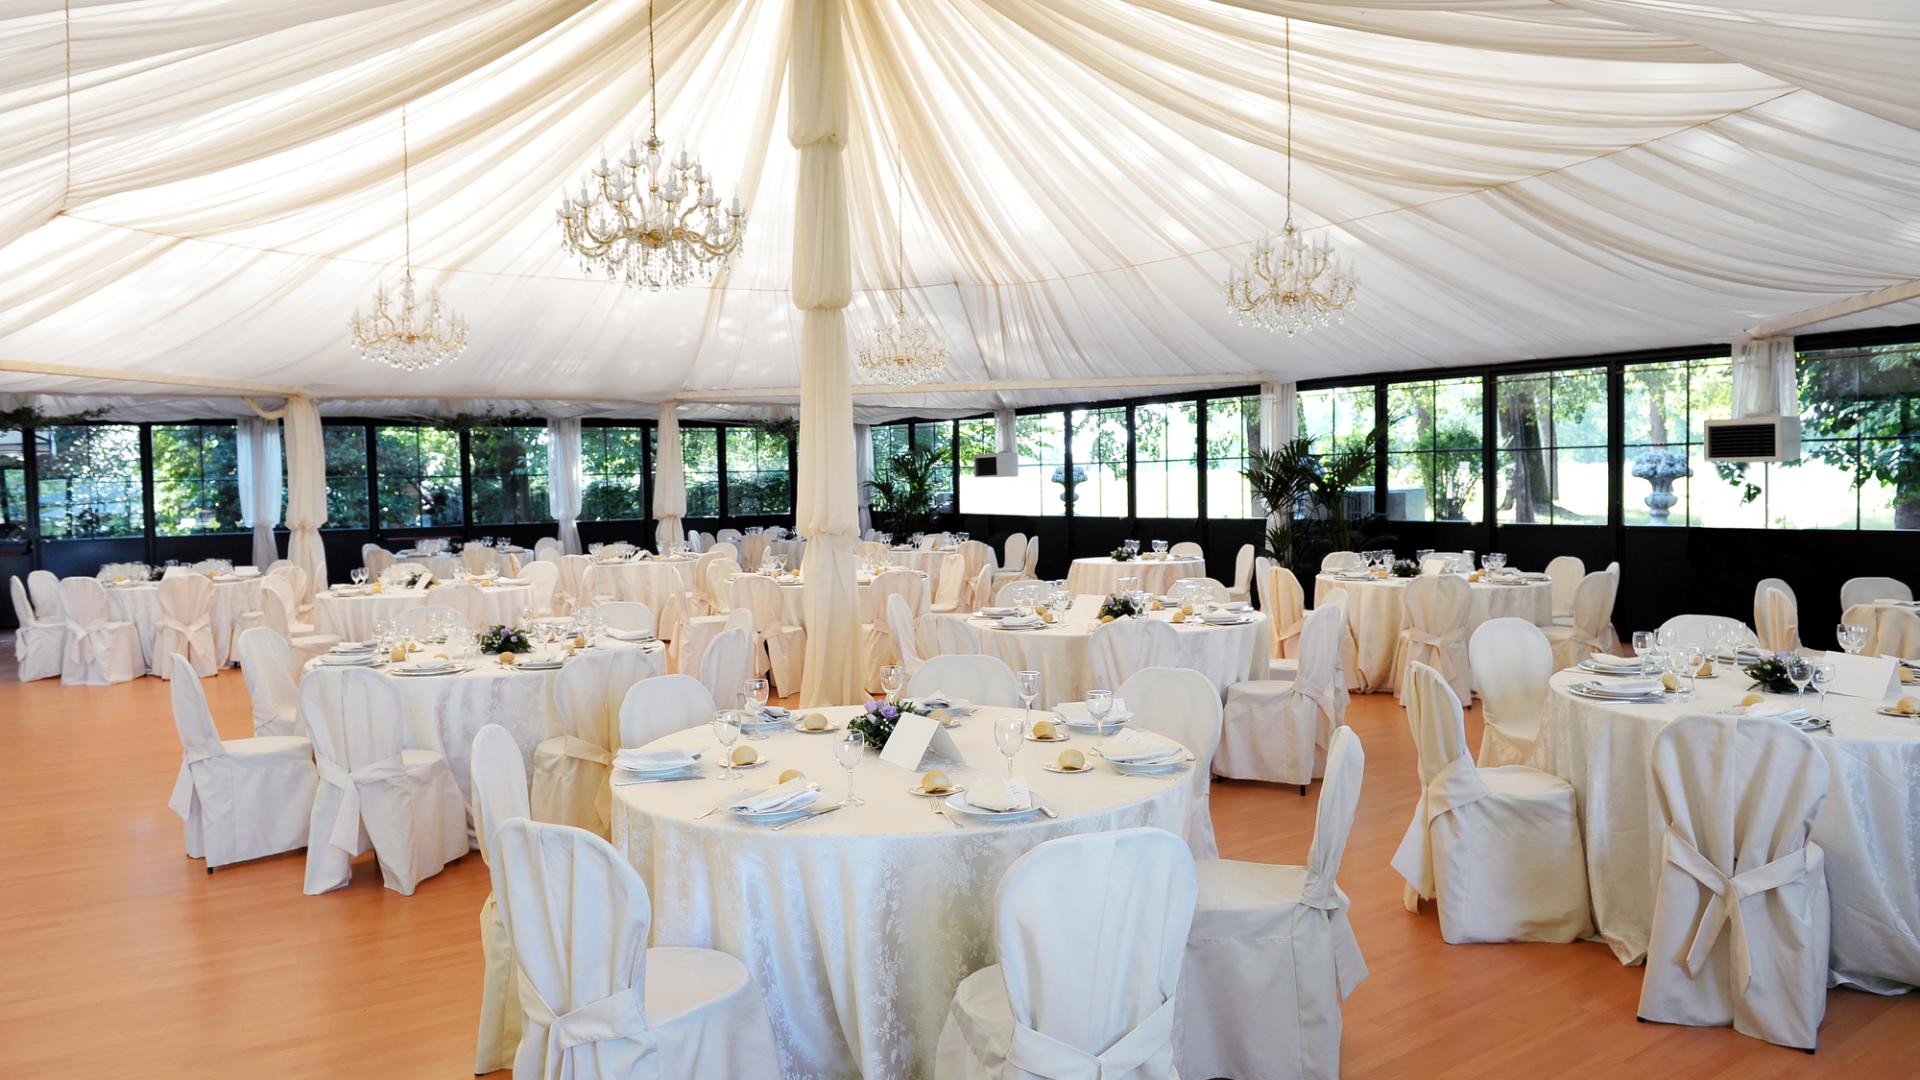 Wedding Packages to Book in Perth